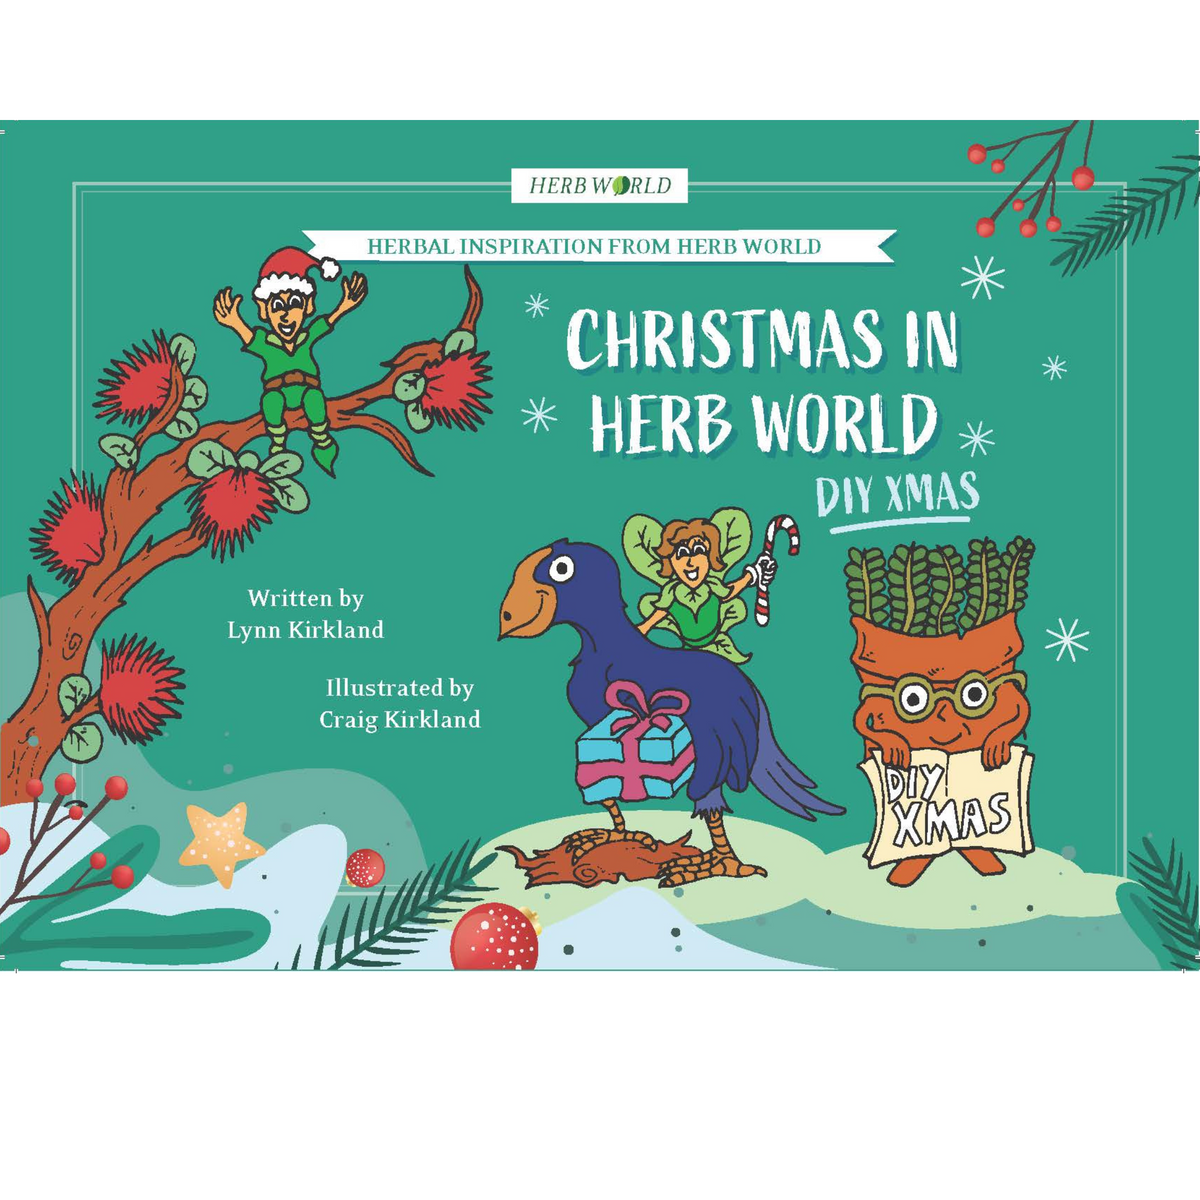 Herb World - Christmas in Herb World primary